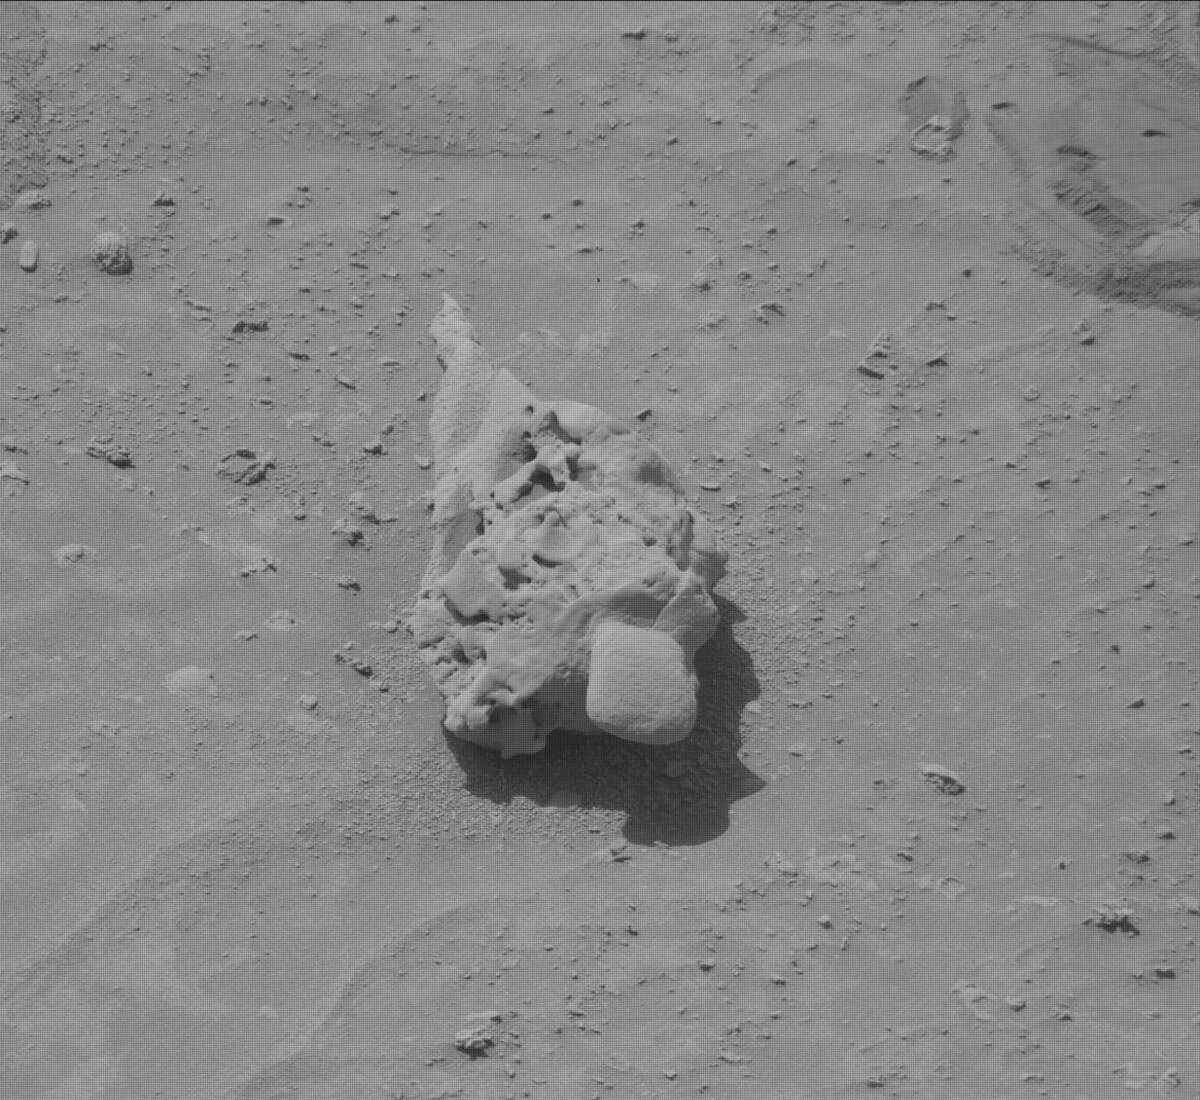 This image shows a Mars rock on the Martian surface and was taken by Curiosity on Sol 3762.